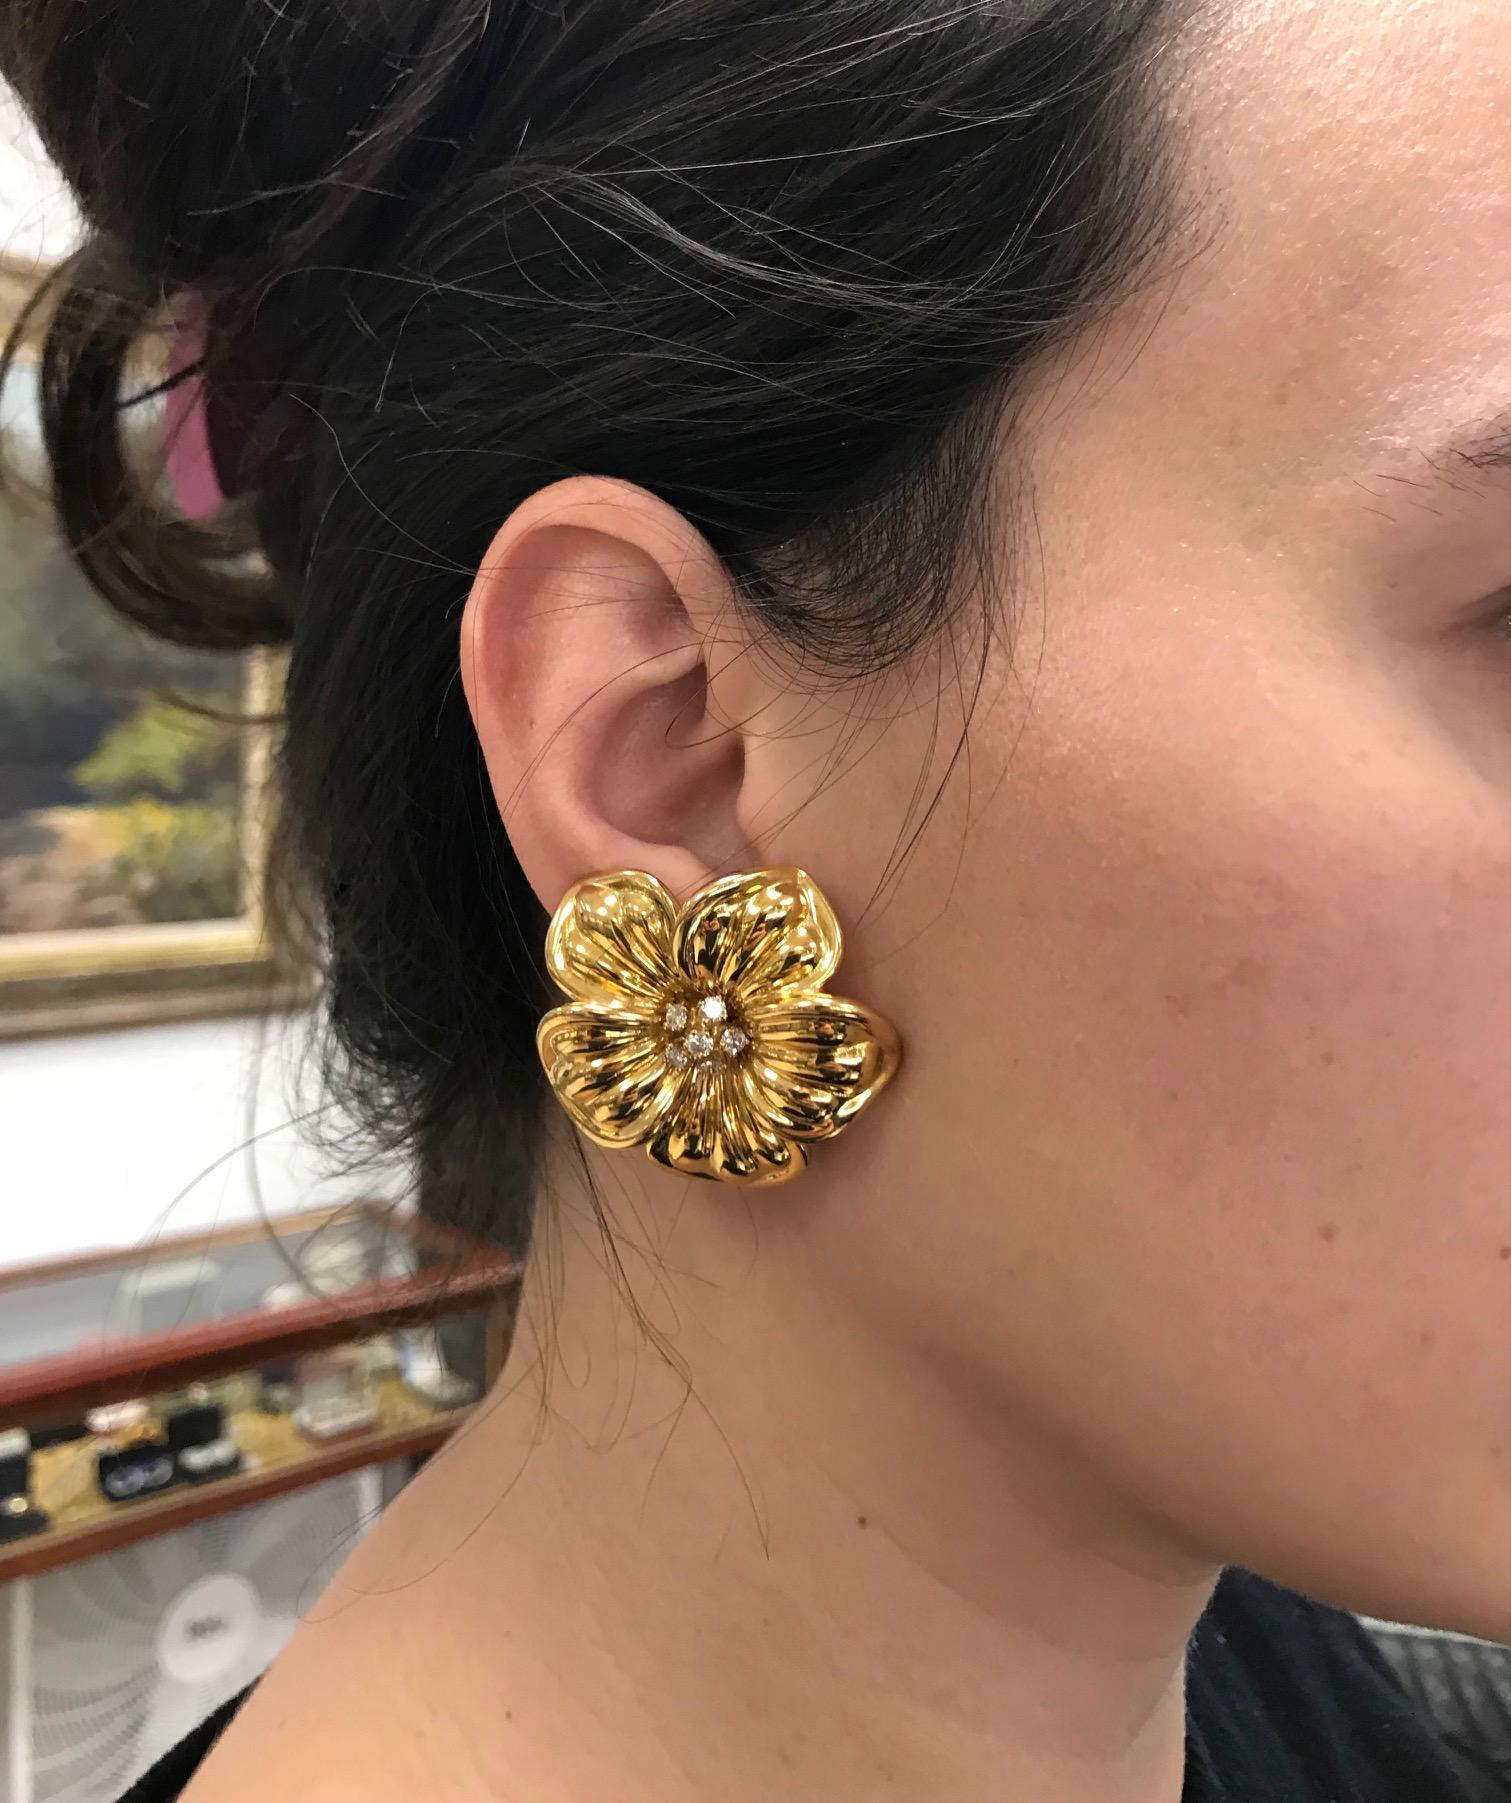 A gorgeous pair of vintage (c. 1980s) floral earrings by Van Cleef & Arpels, from Magnolia collection. Made of 18k gold, featuring round cut diamonds. Total carat weight is 1.01 ct. 
Stamped with VCA maker's mark, a hallmark for 18k gold and diamond